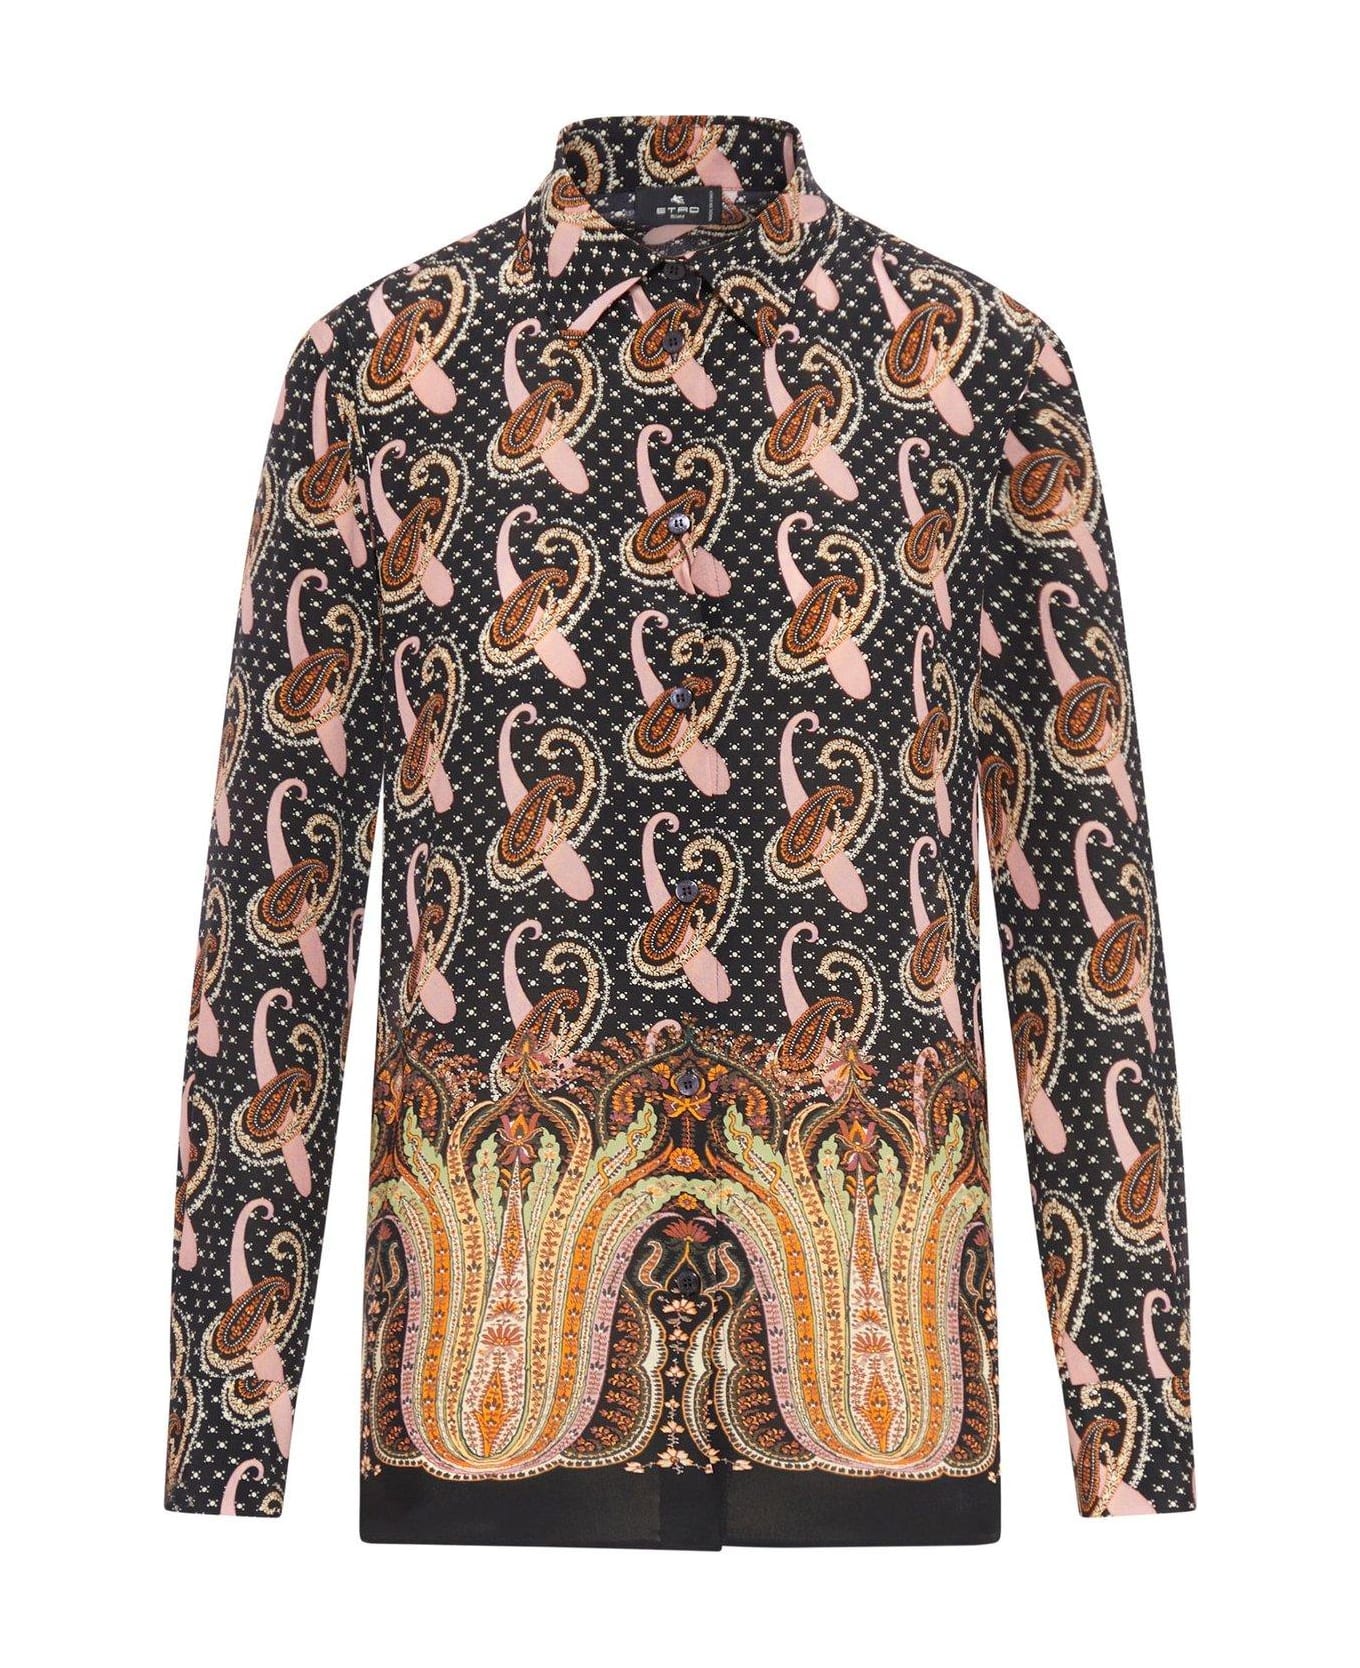 Etro All-over Patterned Long-sleeved Shirt - Black